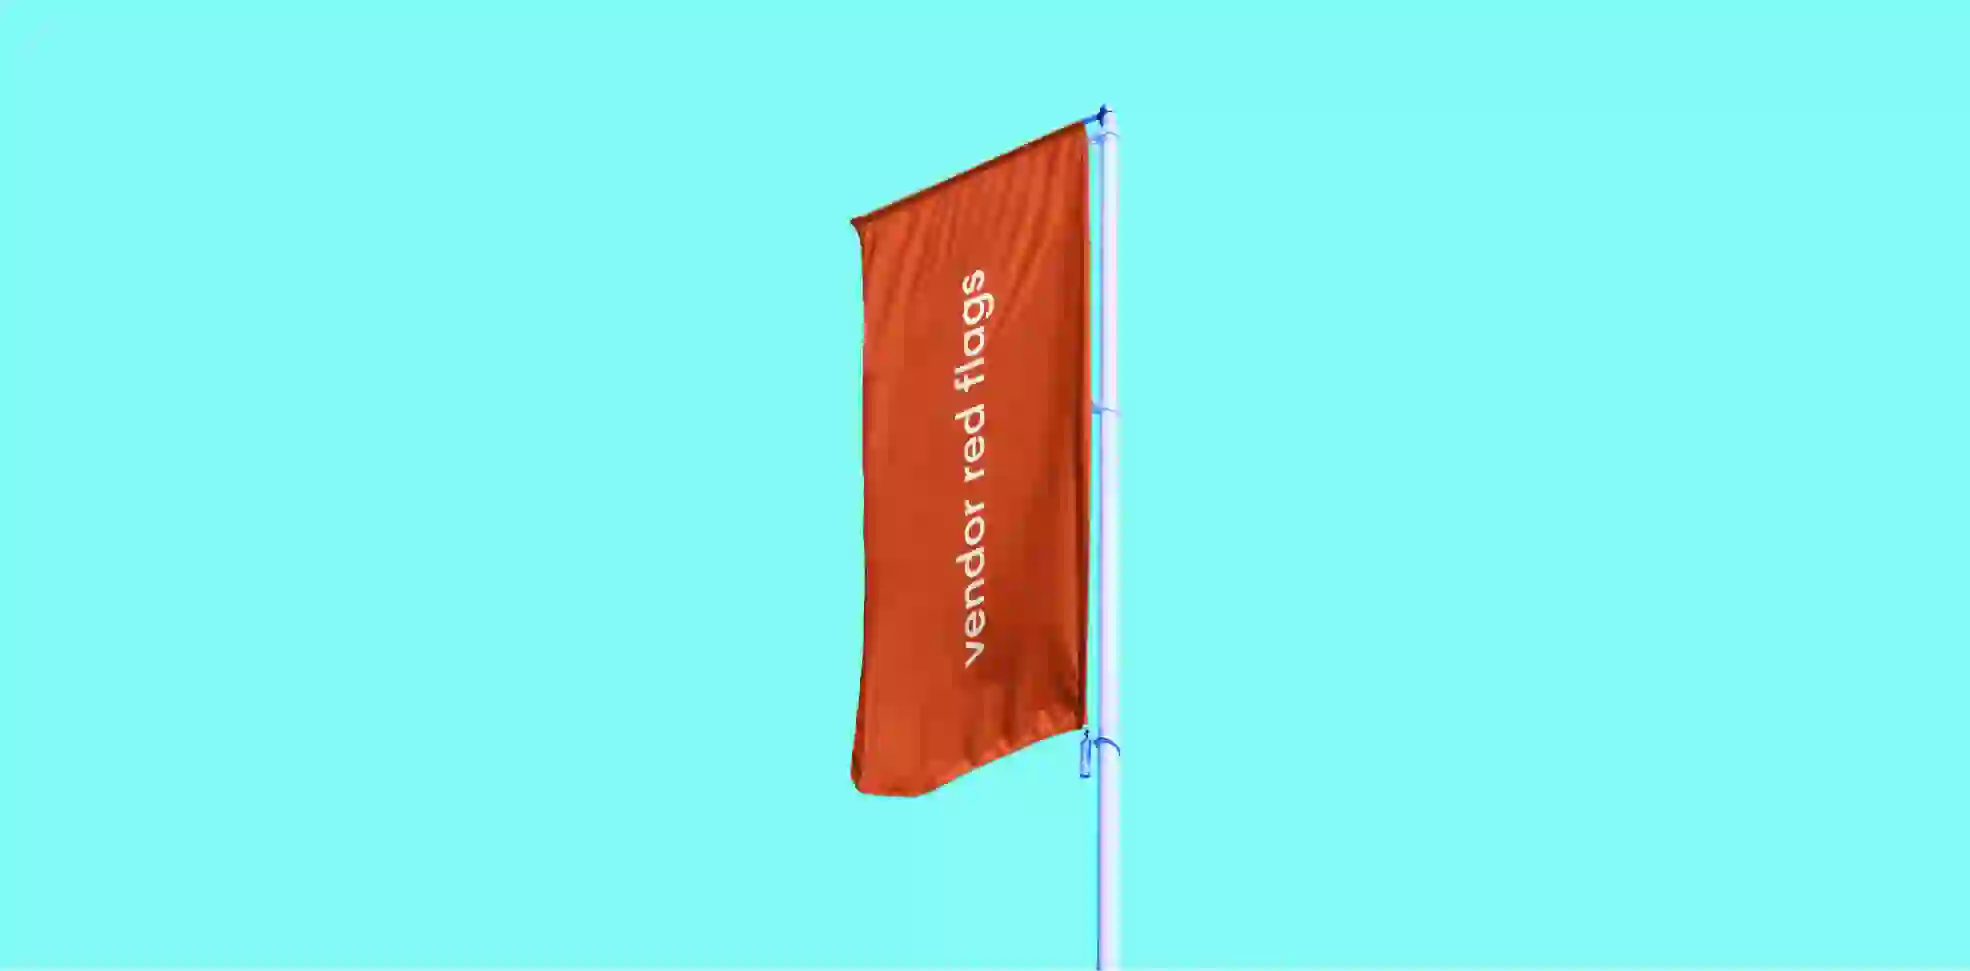 Red flag on blue background